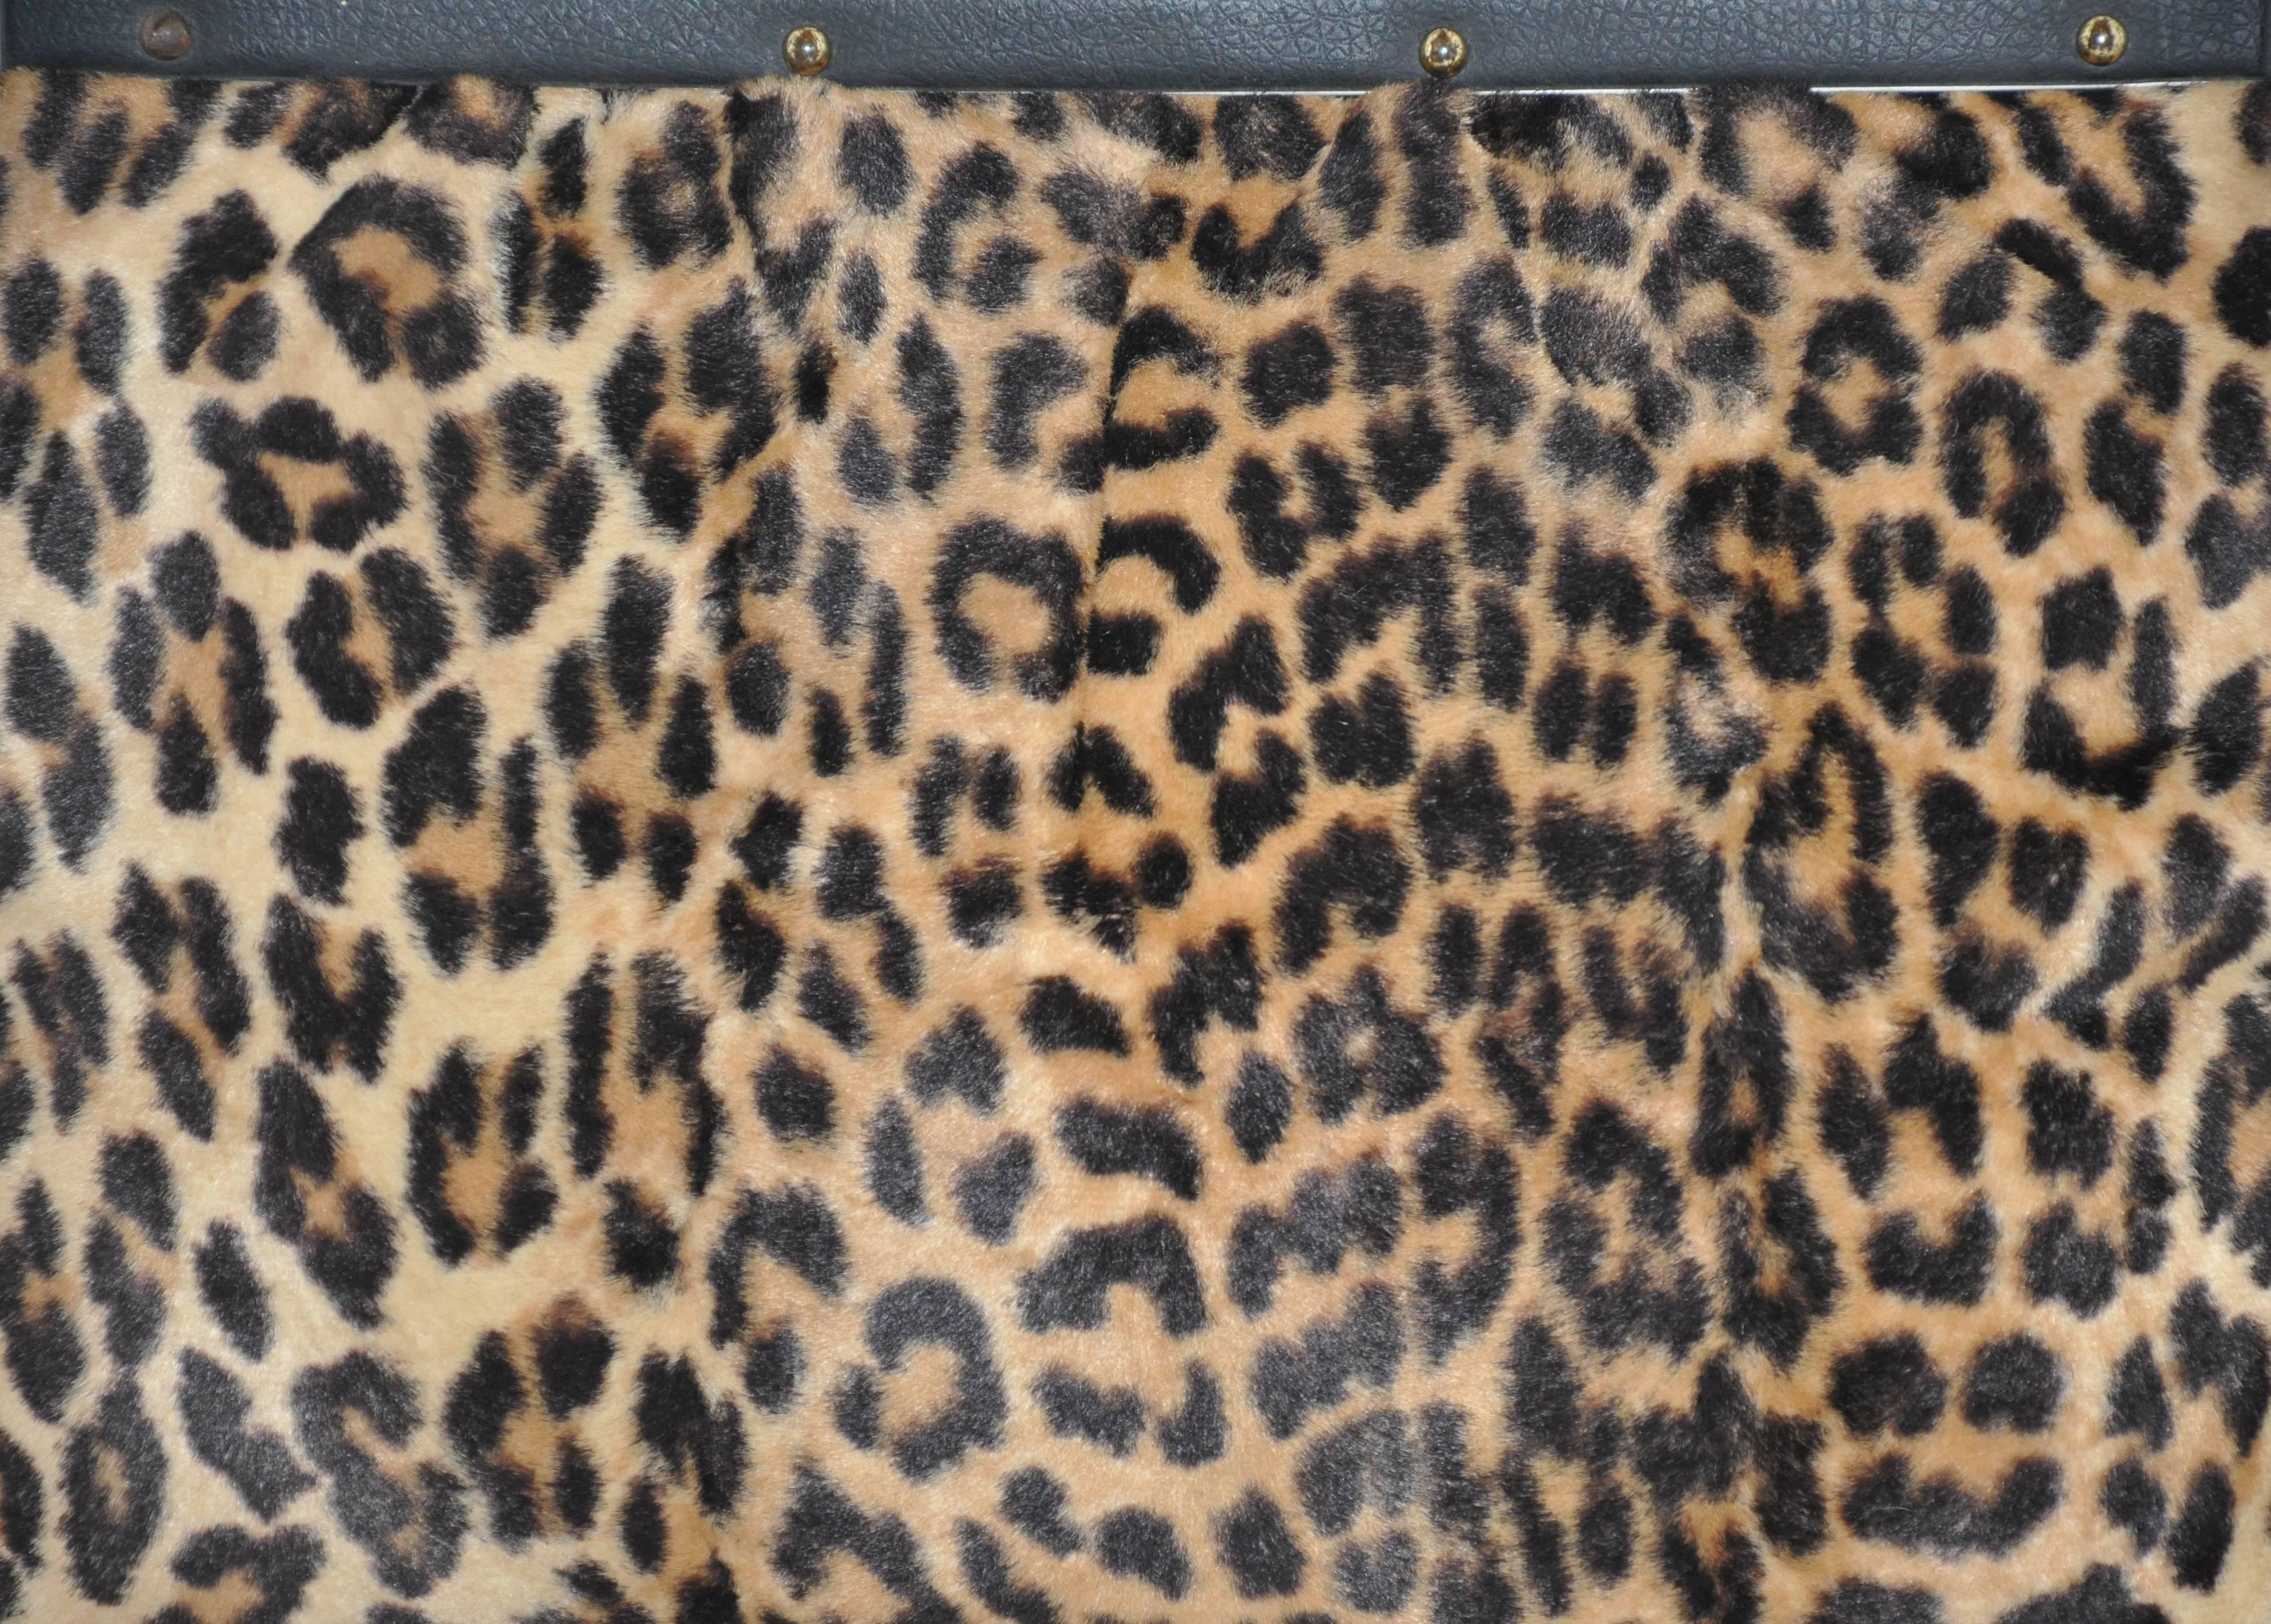           Ronay wonderful huge faux leopard print fur tote is combined with a heavy-duty gold hardware frame detailed with gold hardware studs on both the front and back of the frame. The top features a strong 